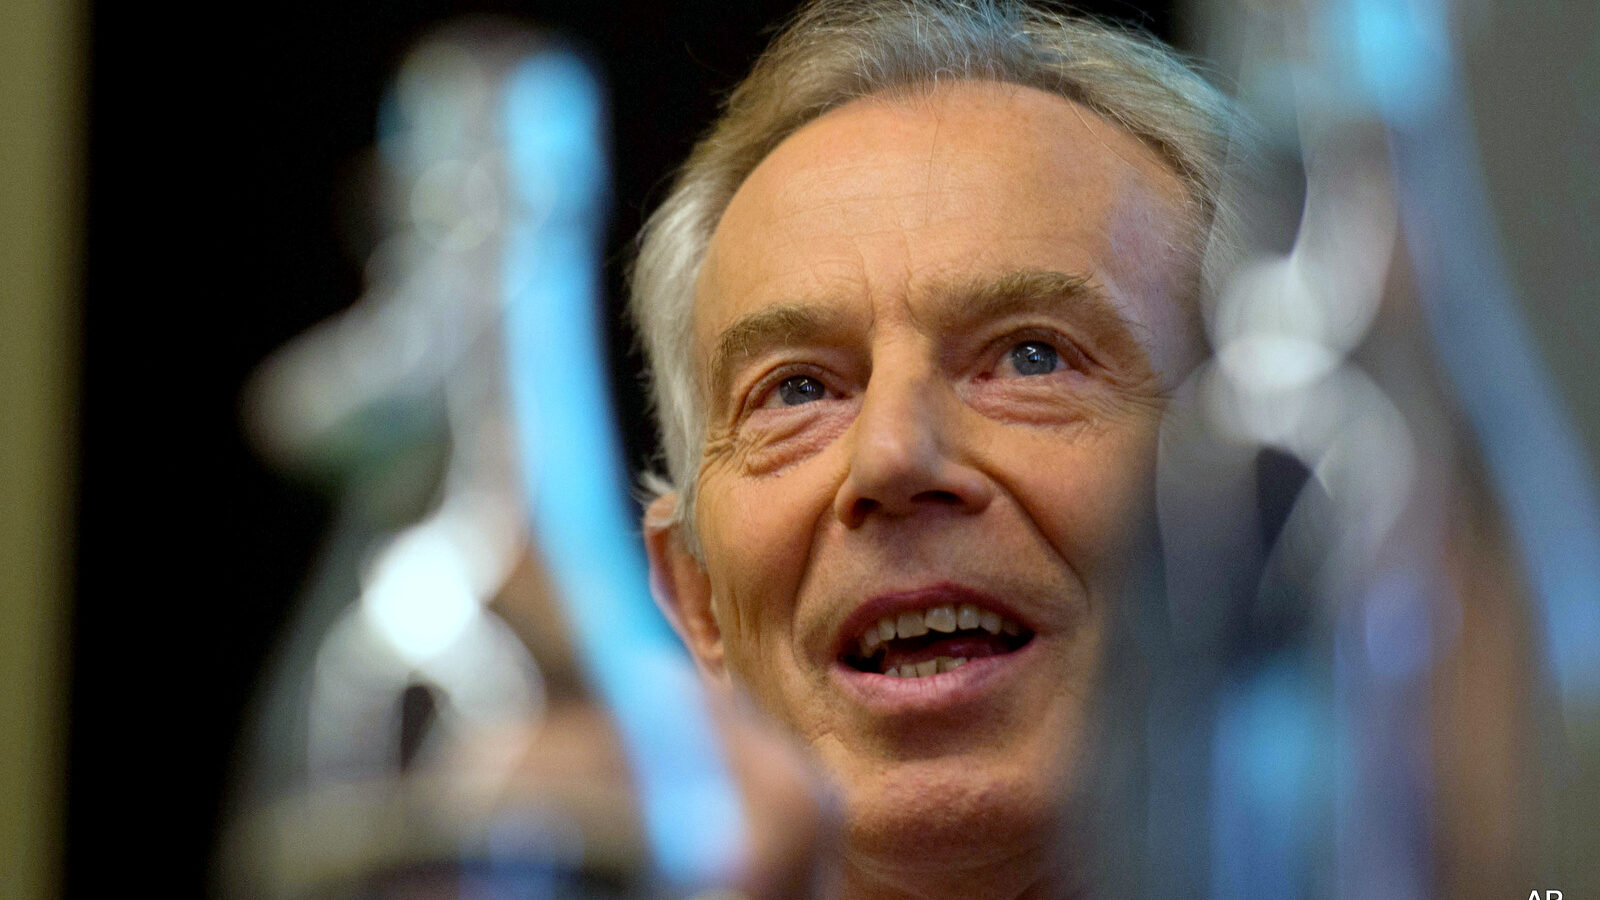 Former British Prime Minister Tony Blair takes part in a discussion on Britain in the World, in London, Tuesday May 24, 2016, where he acknowledged the invading nations had underestimated the "forces of destabilization" that would emerge in Iraq after the toppling of dictator Saddam Hussein. Blair said Tuesday that the Islamic State group forces will be defeated only with a ground war involving Western troops.